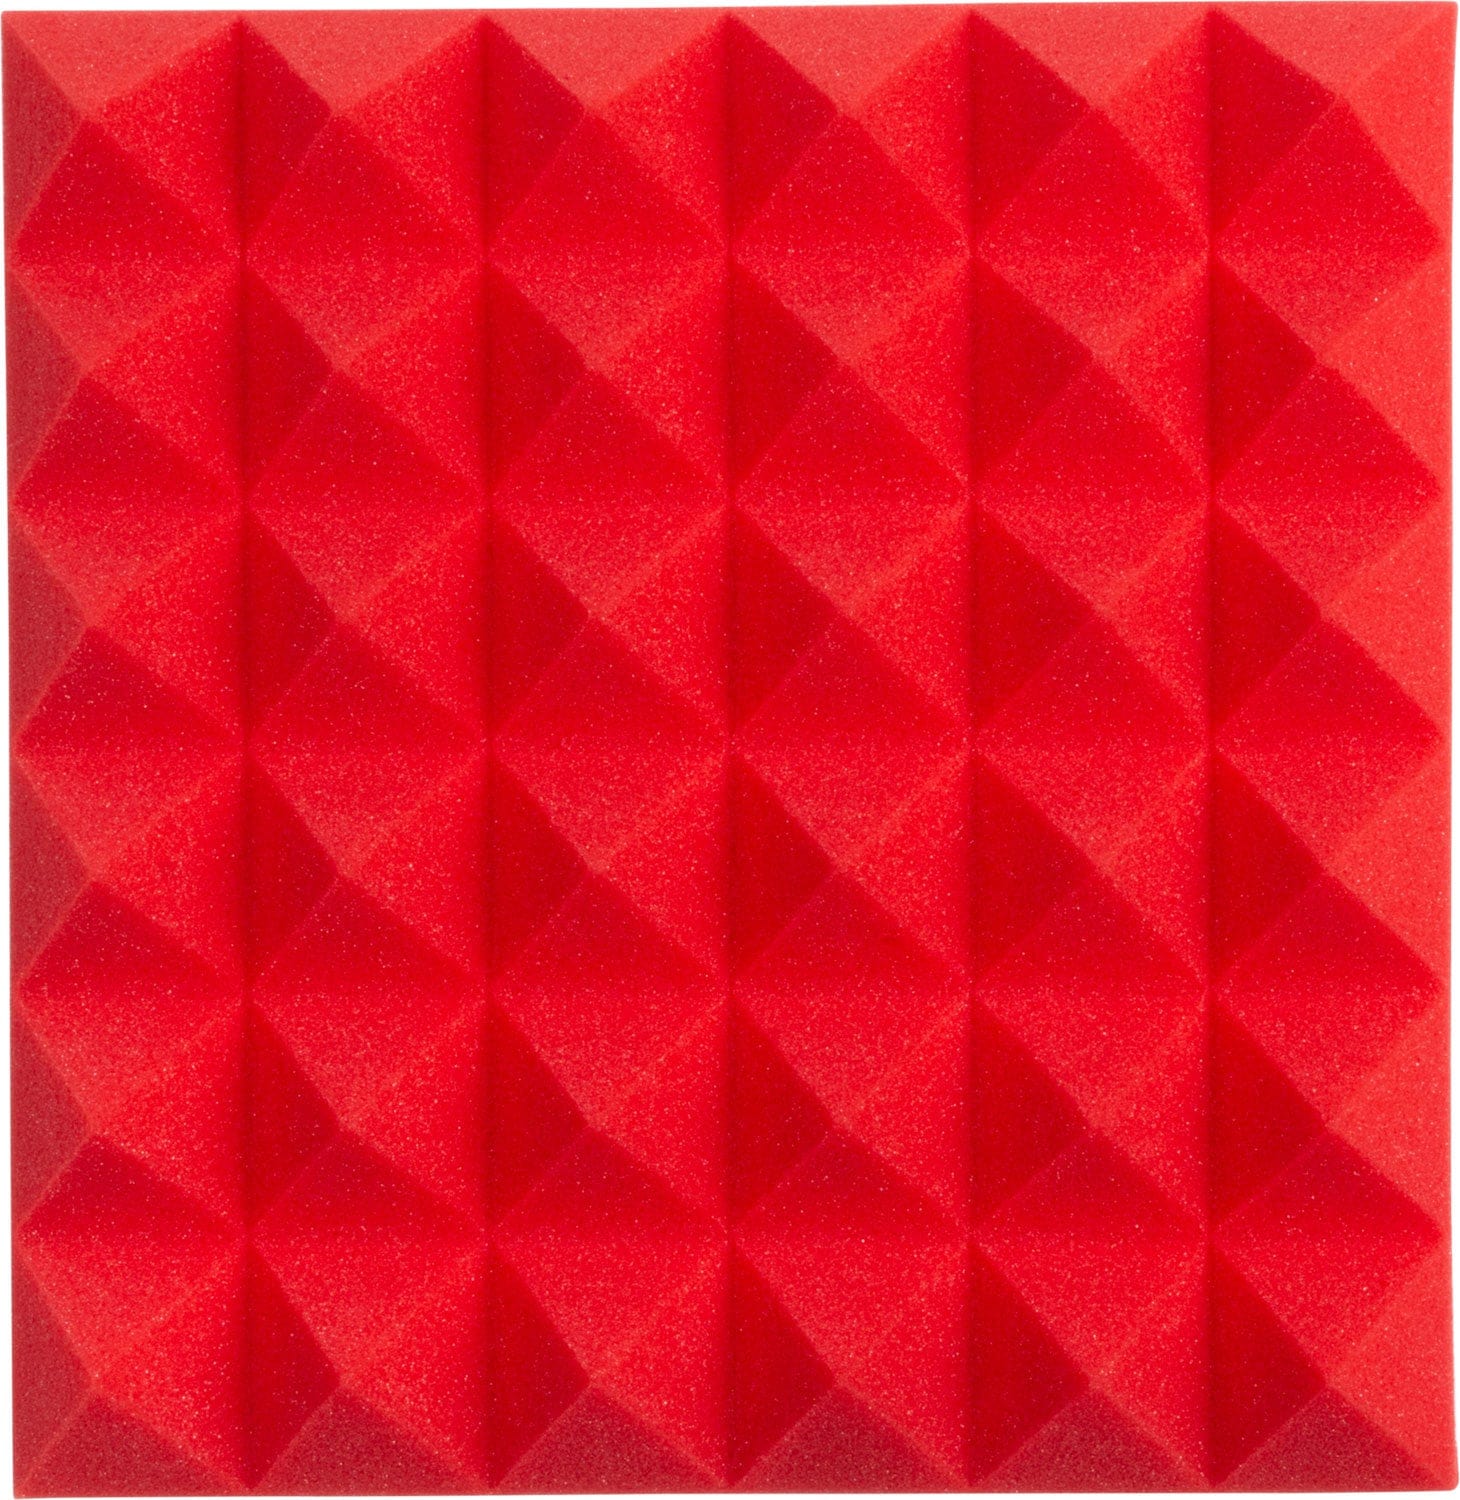 Gator GFW-ACPNL1212PRED-8PK 8-Pack of 12x12x2-inch Pyramid Foam Red - PSSL ProSound and Stage Lighting